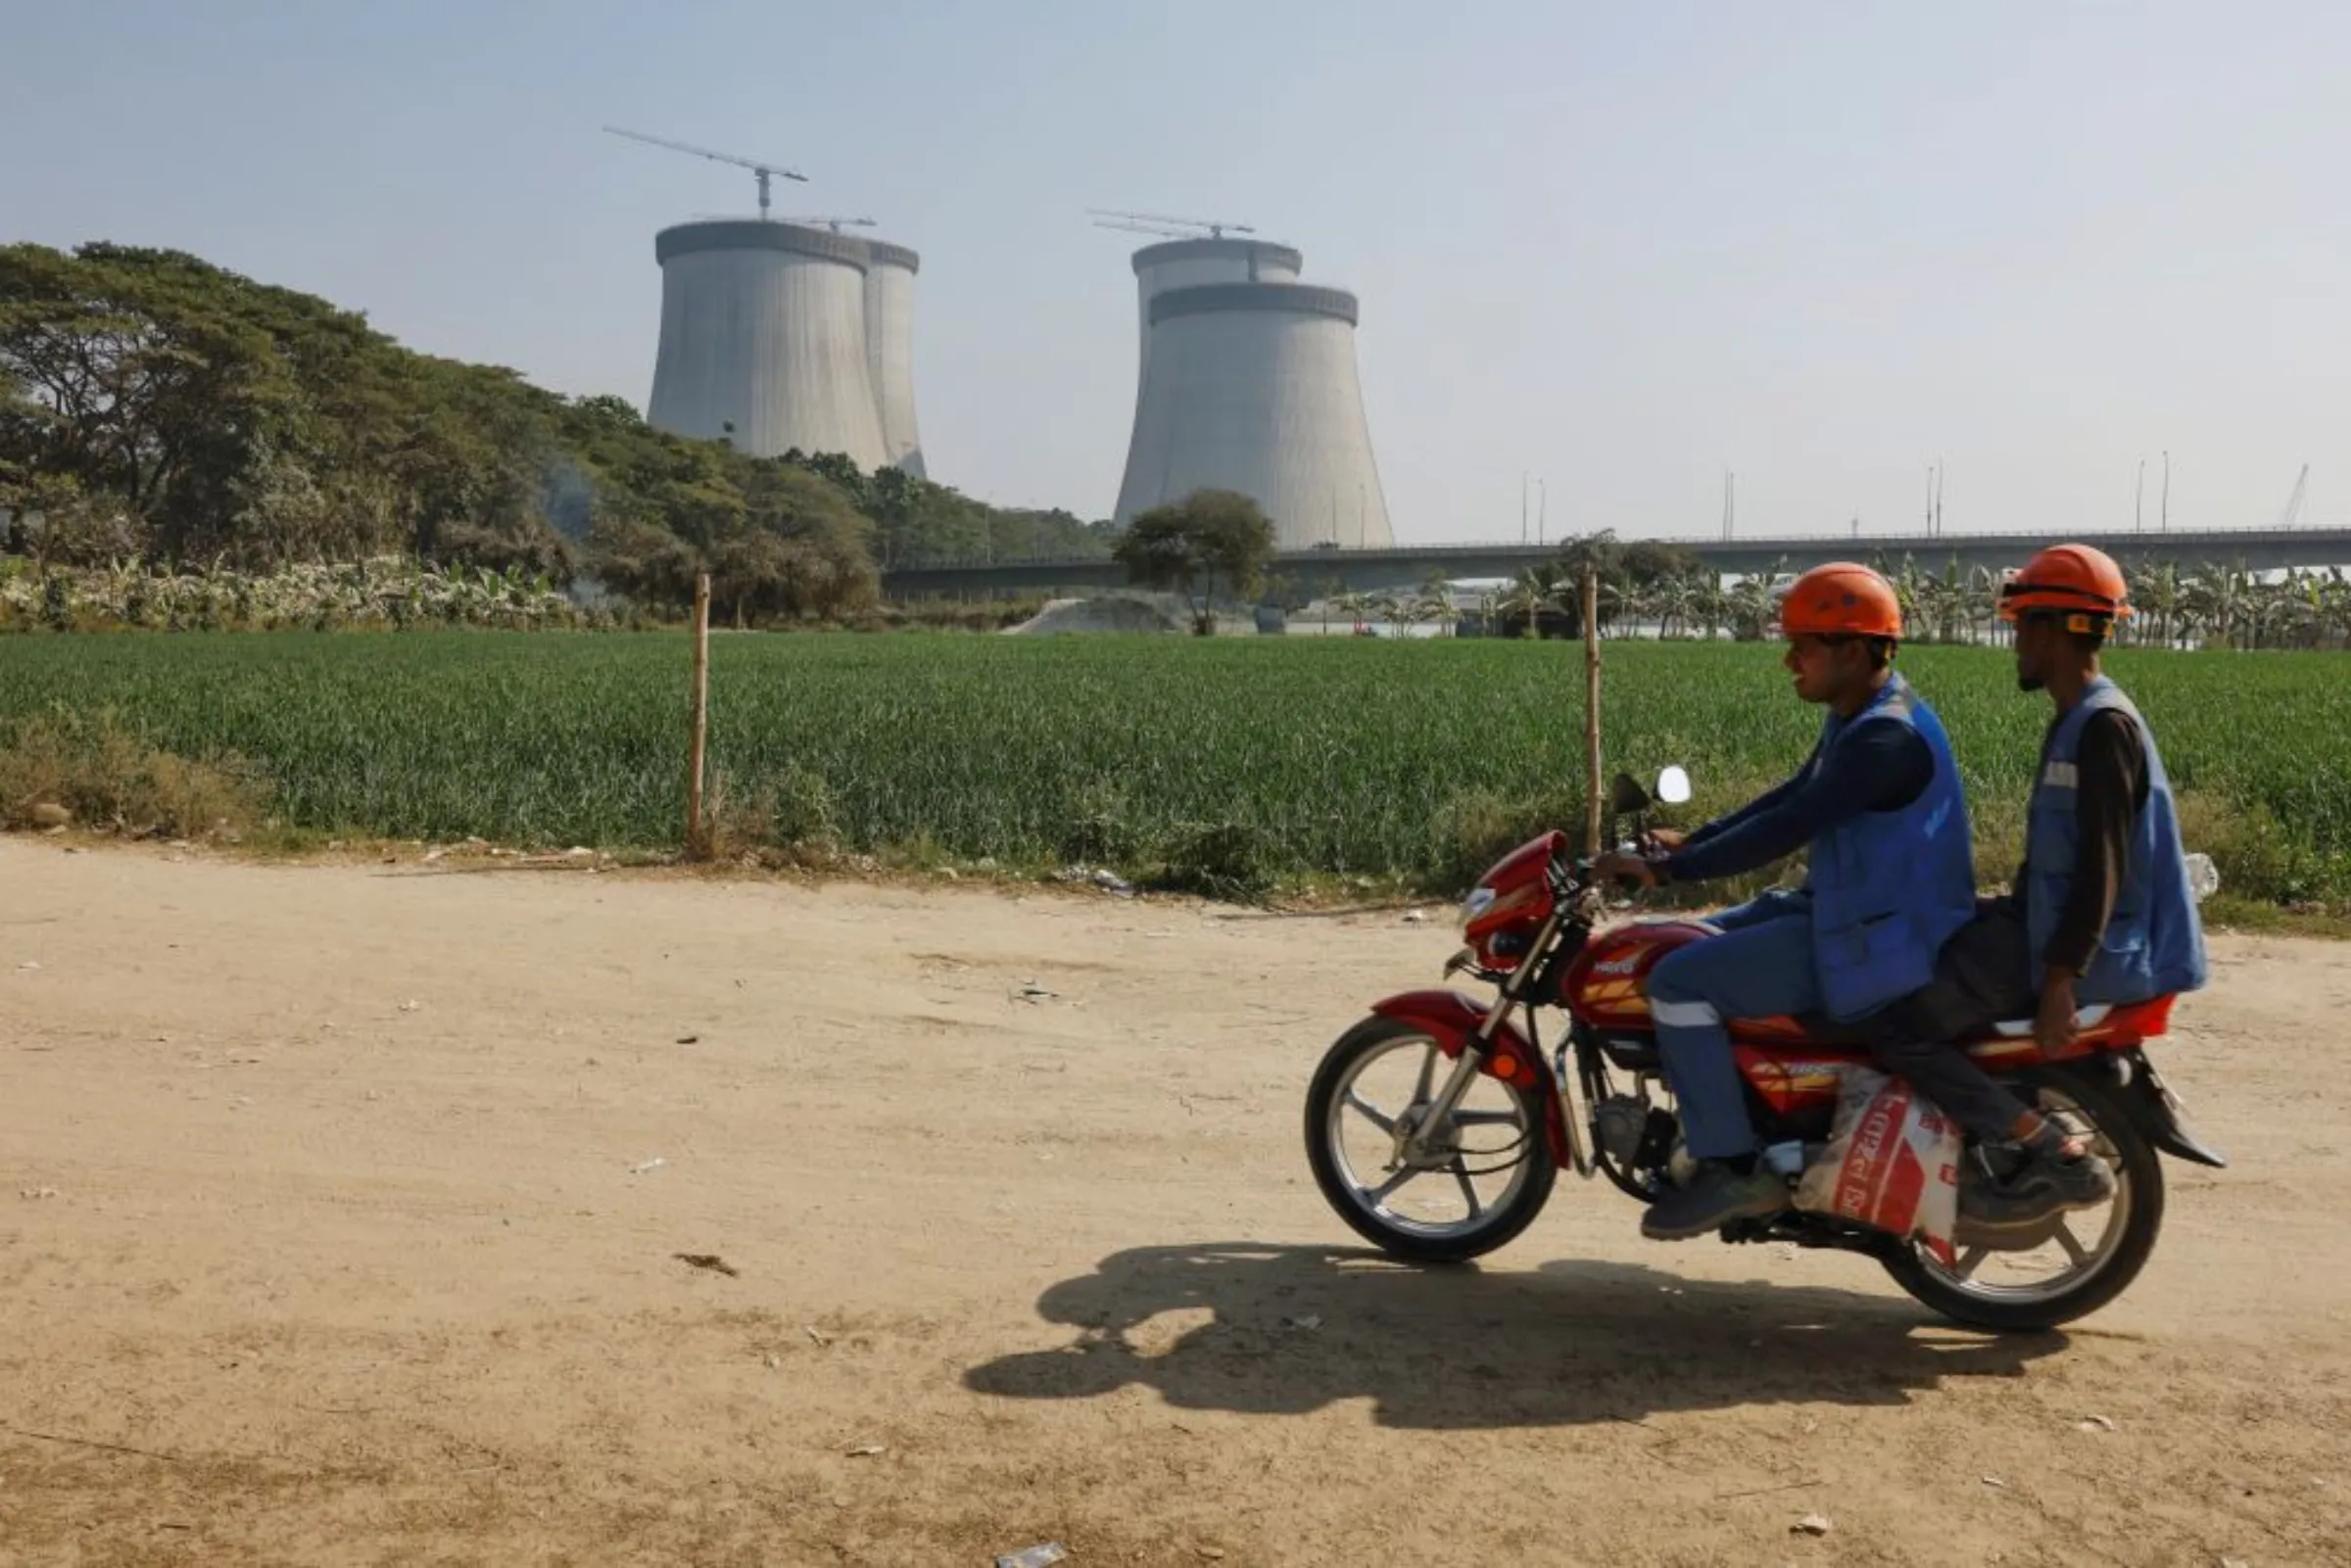 Two people pass by on a motorcycle as Rooppur Nuclear Power Plant, in Ishwardi upazila of Pabna District, west of Dhaka, Bangladesh, February 14, 2023.